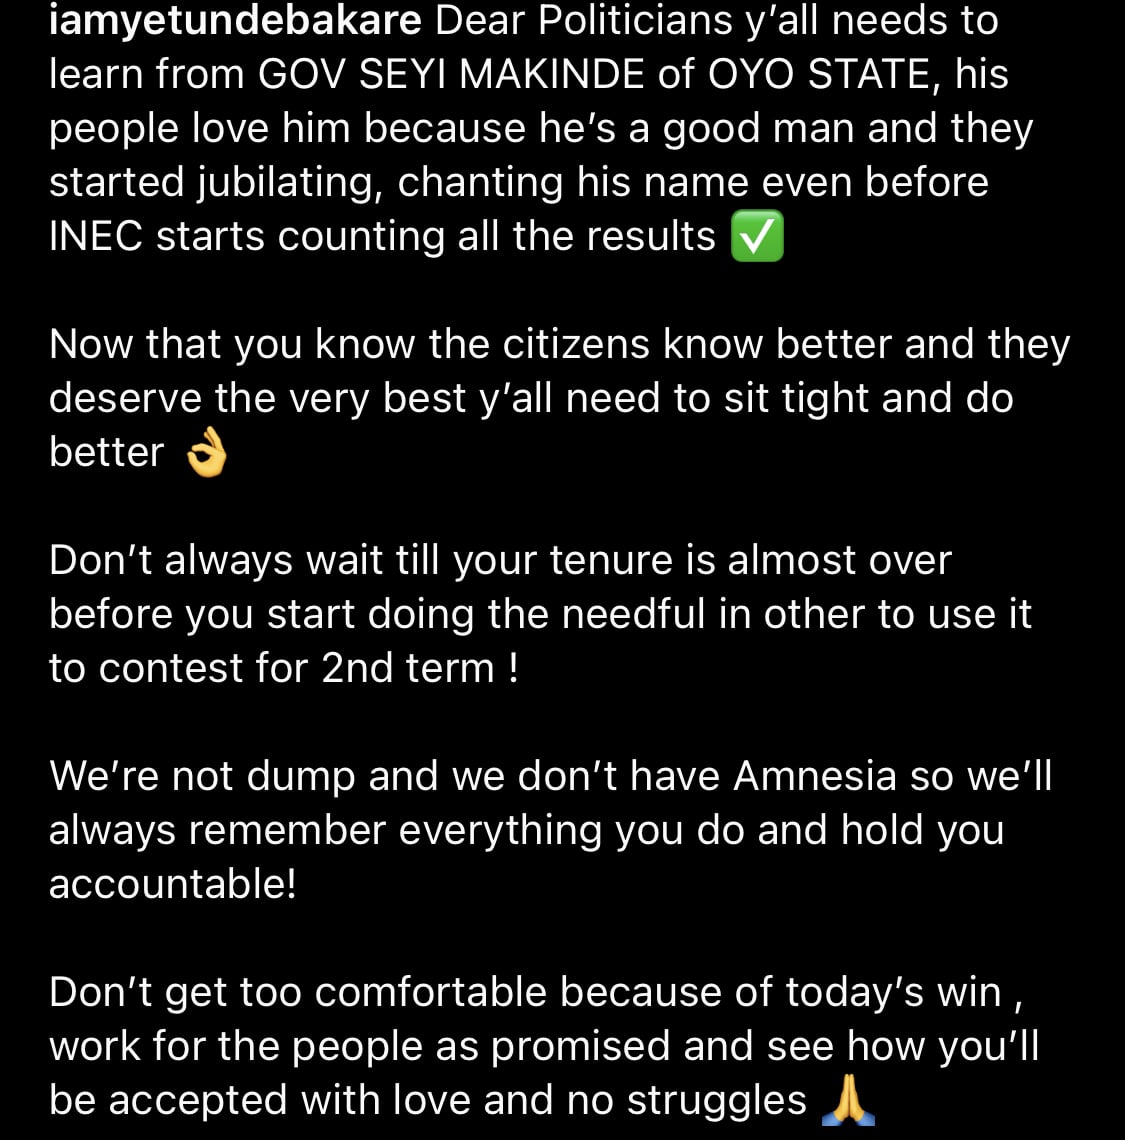 1679236552 945 Dear politicians yall need to learn from Seyi Makinde